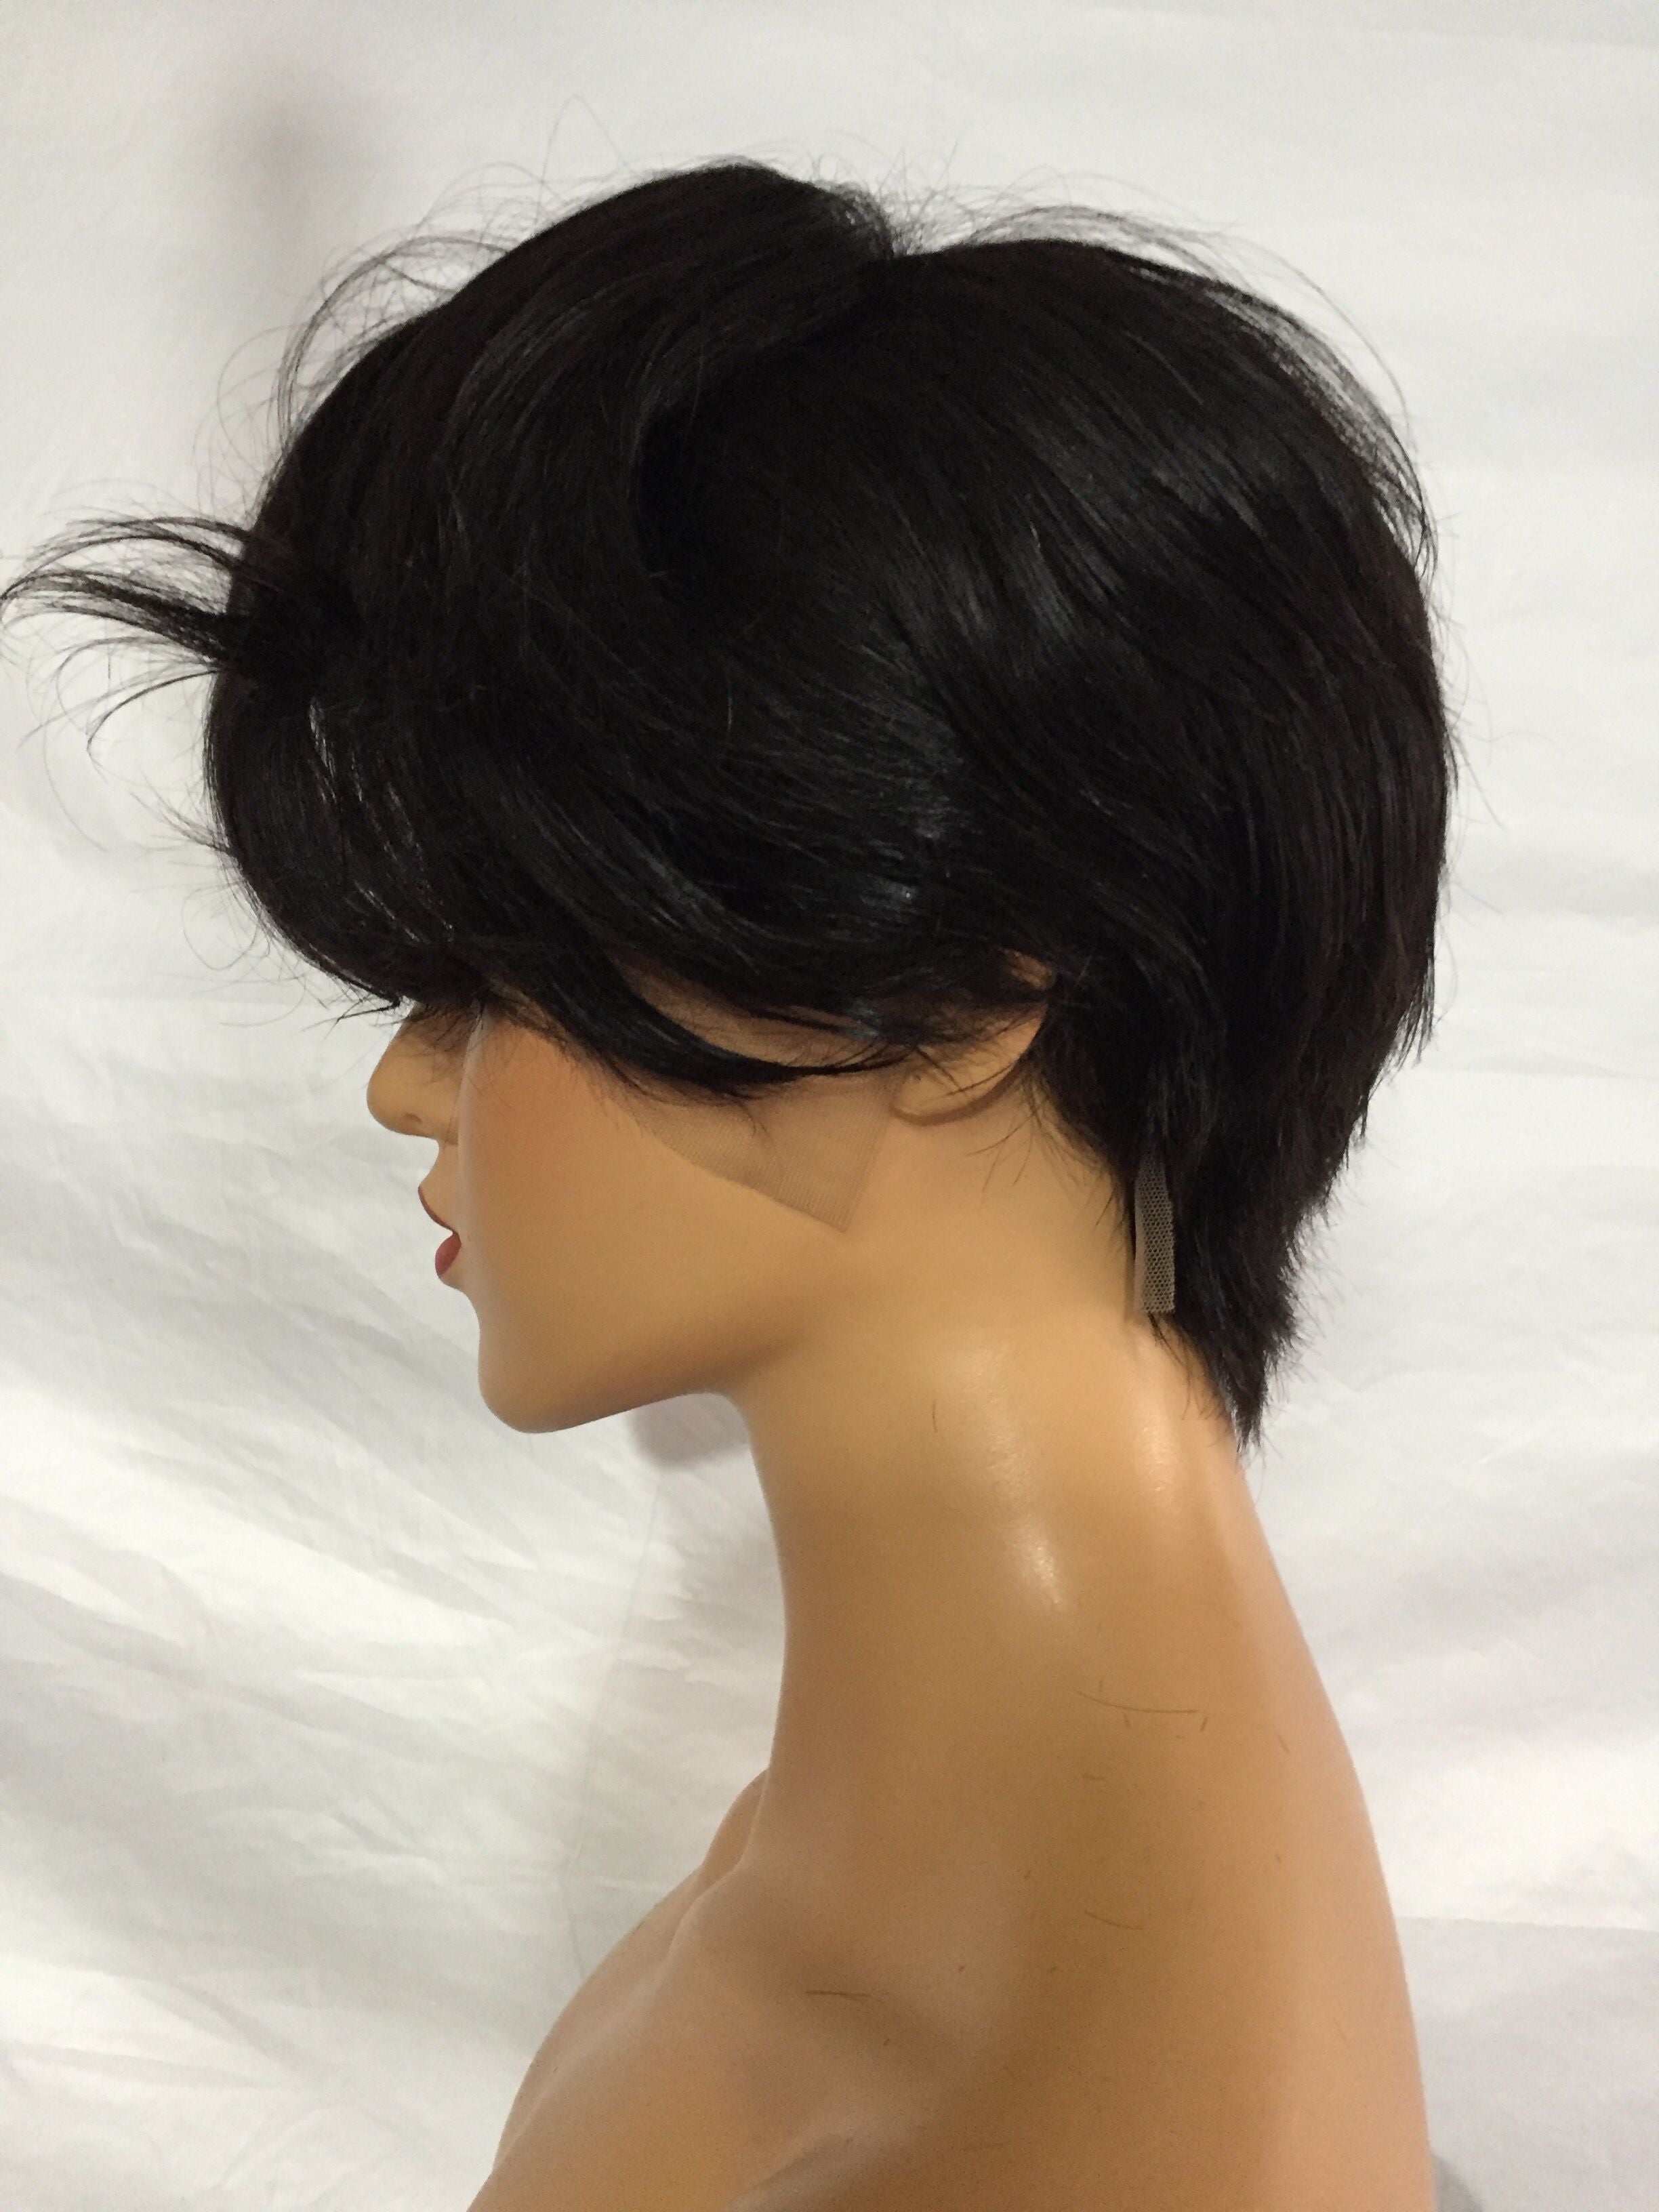 Pixie Wig Lace Short Cut Wigs Real Human Hair Wig Firstgoldhair